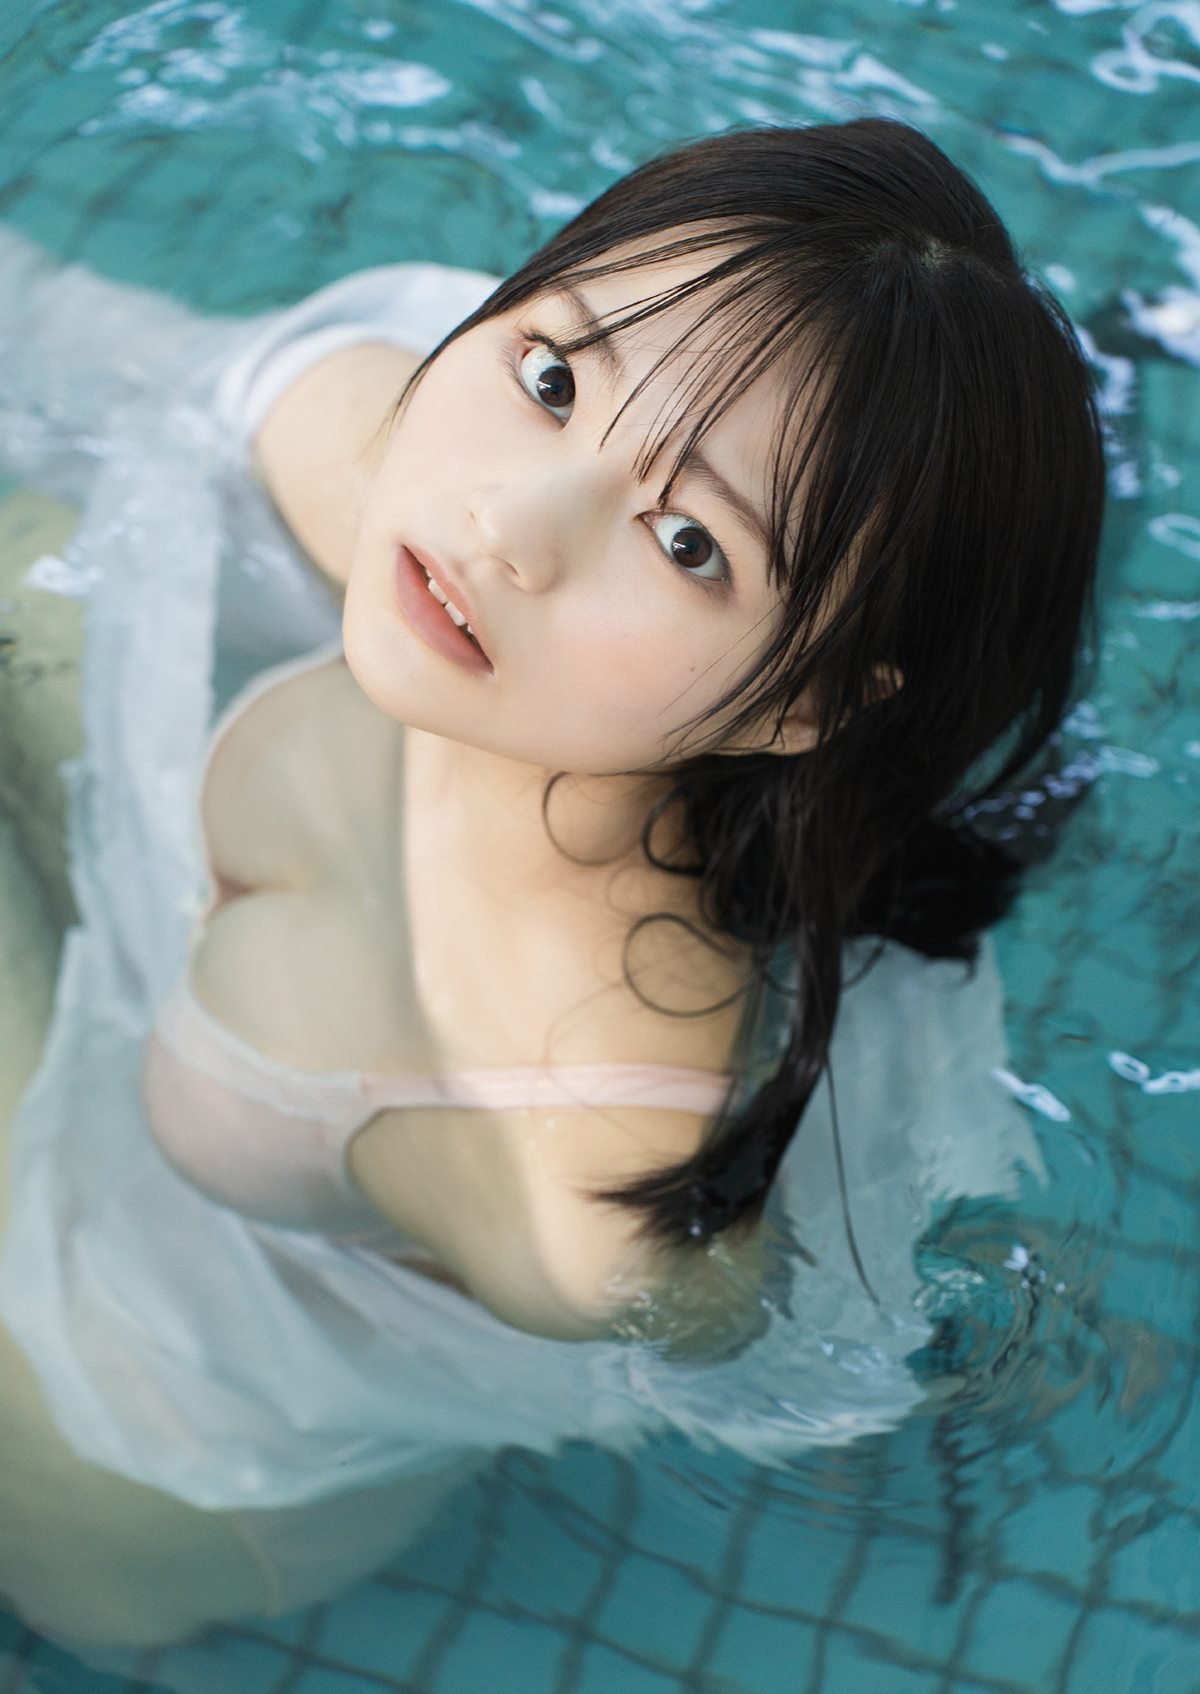 YJ Photobook Usa 宇咲 The only daughter of a public bath is training as a trimmer 銭湯のひとり娘は、トリマー修行中 2022 04 21 0042 4464512902.jpg